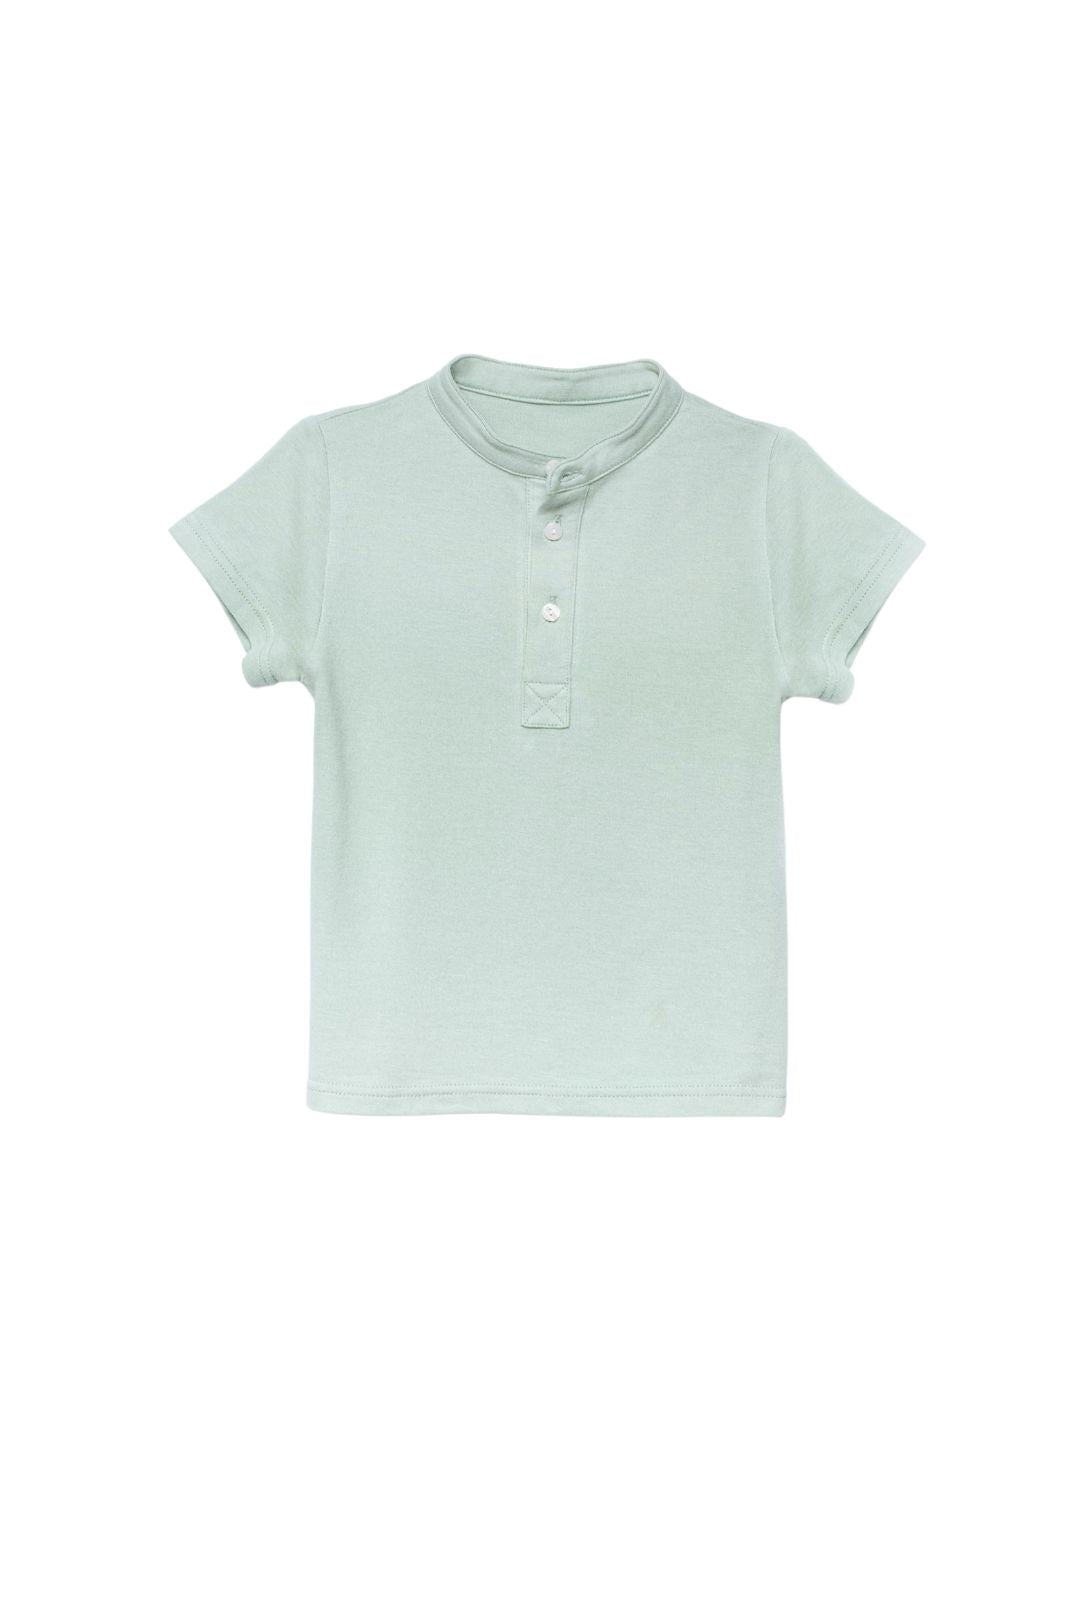 Product image of boys short sleeve top in the color aloe